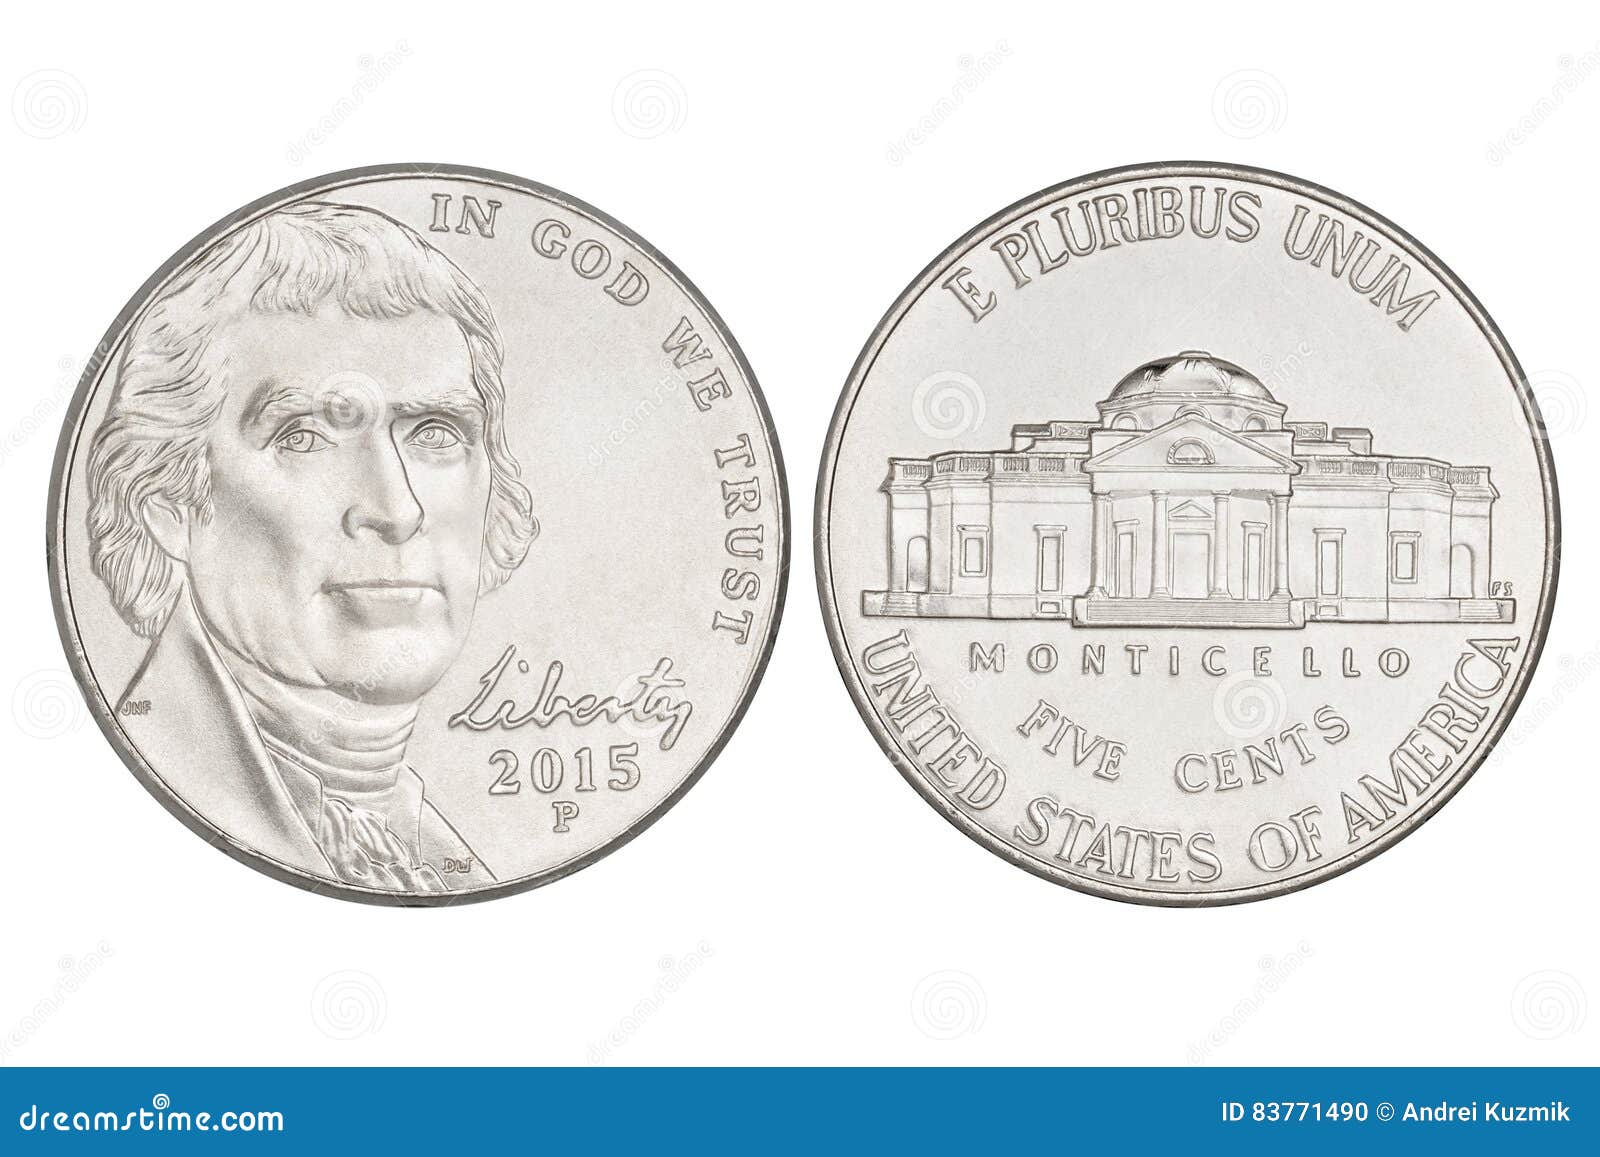 Five cents nickel coin stock photo. Image of front, monticello - 83771490